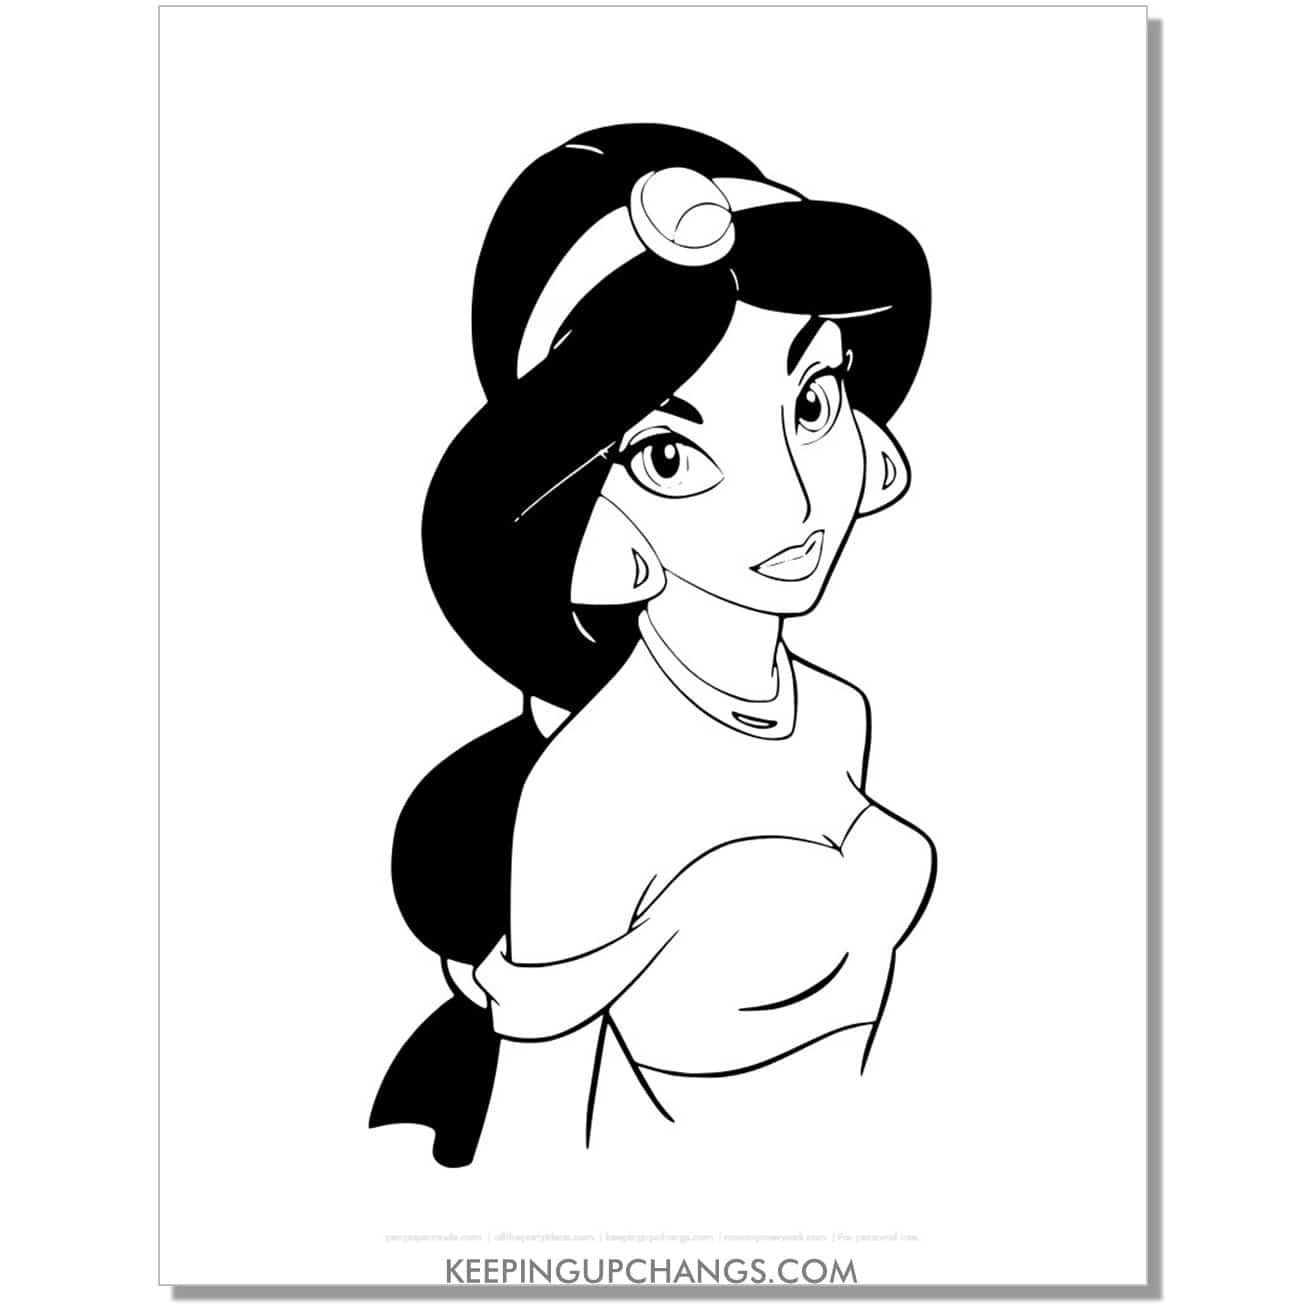 jasmine upper body profile coloring page, sheet.